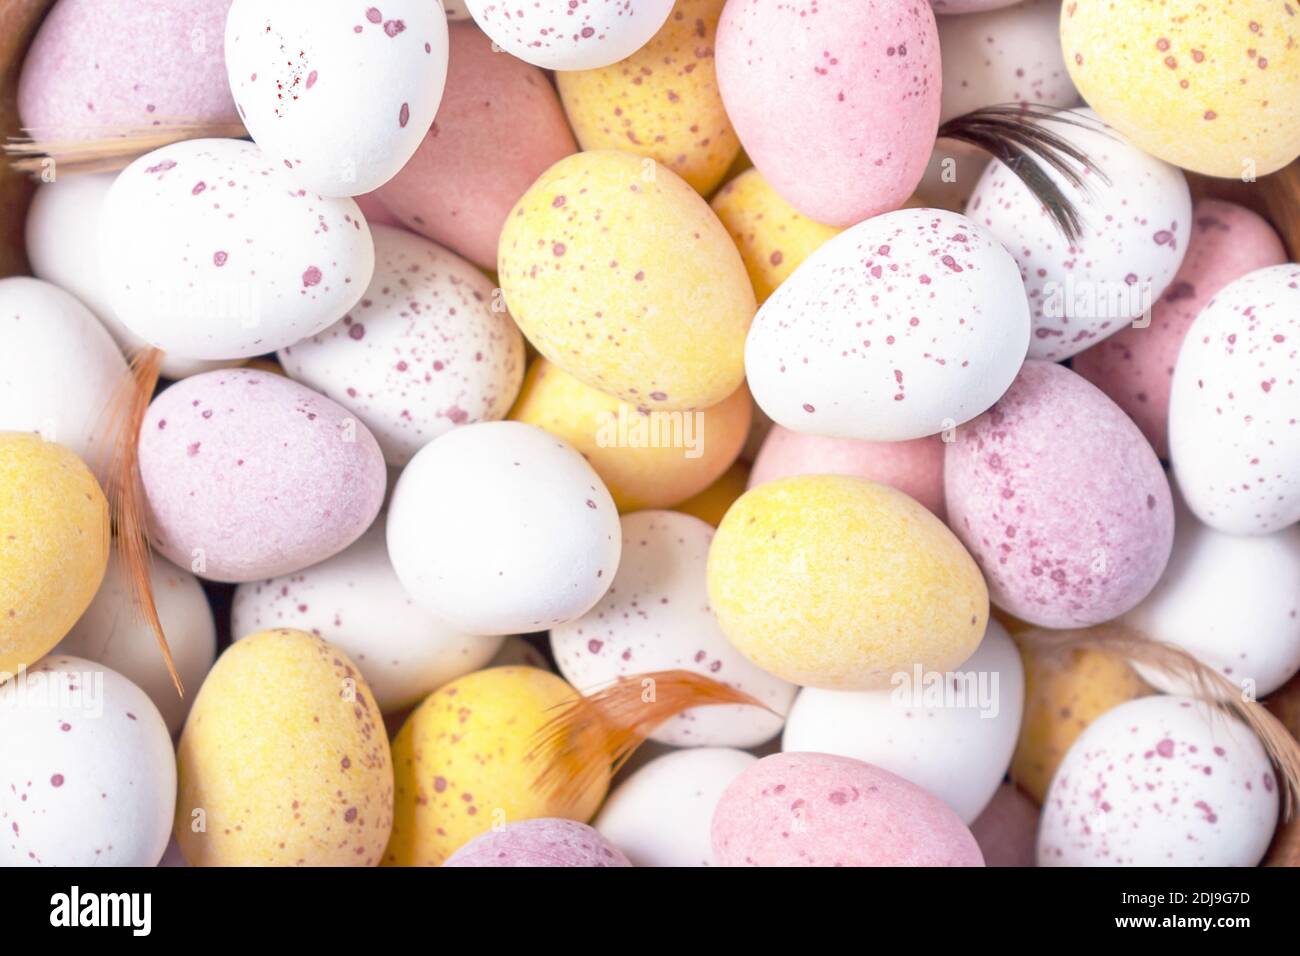 Easter holidays decoration. Funny colourful decorative chocolate Easter eggs background. Close-up. Top view. White yellow pink eggs for Easter treat. Stock Photo